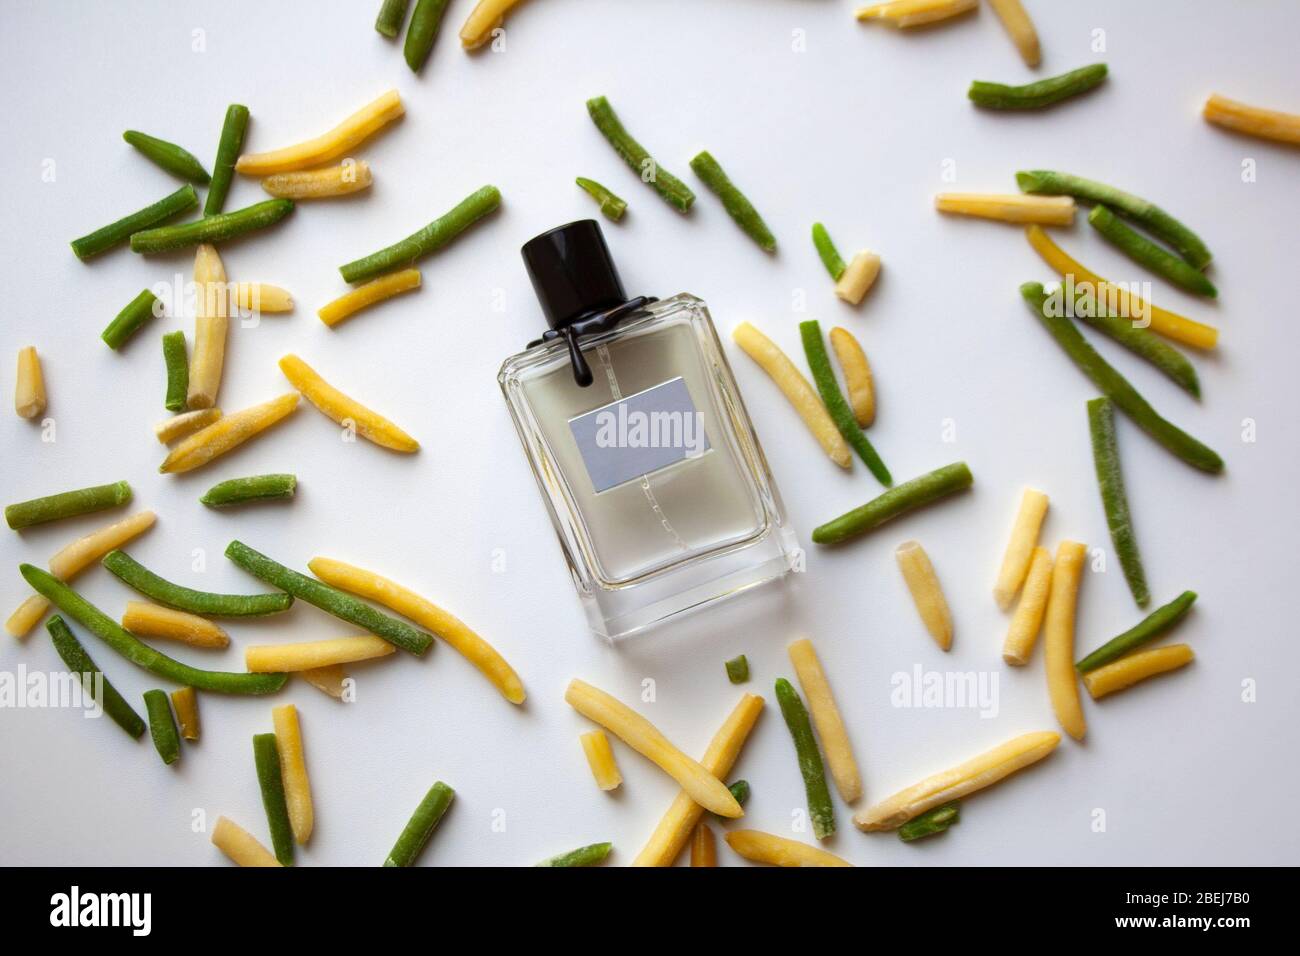 Glass perfume bottle with green and yellow bean pods on white background Stock Photo